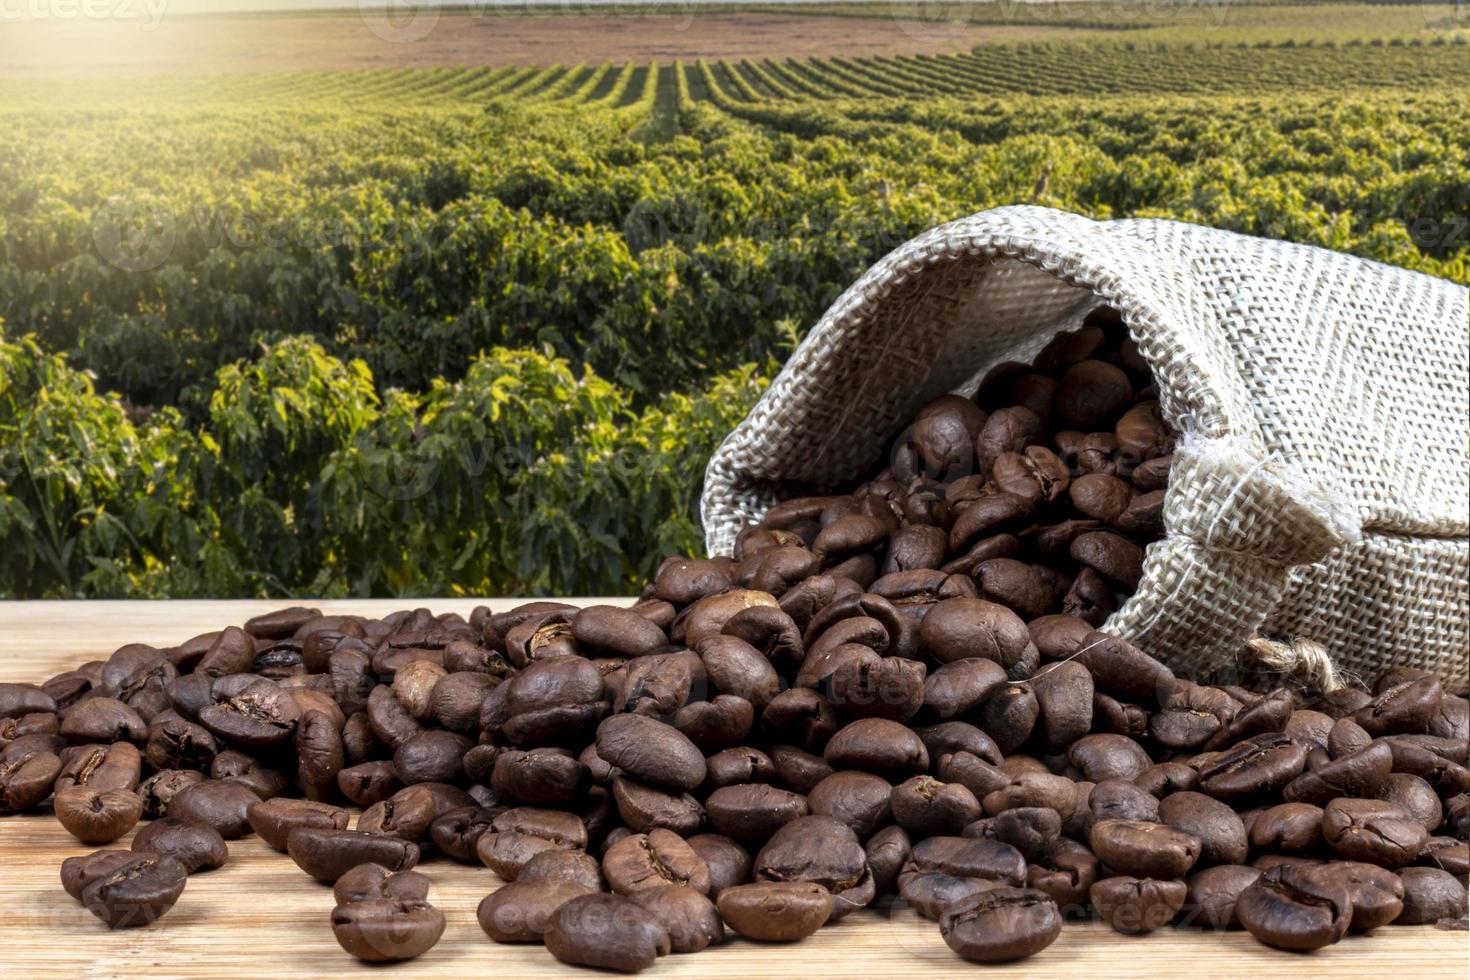 Roasted coffee beans in jute bag on the wooden table, with coffee field farm background in Brazil photo